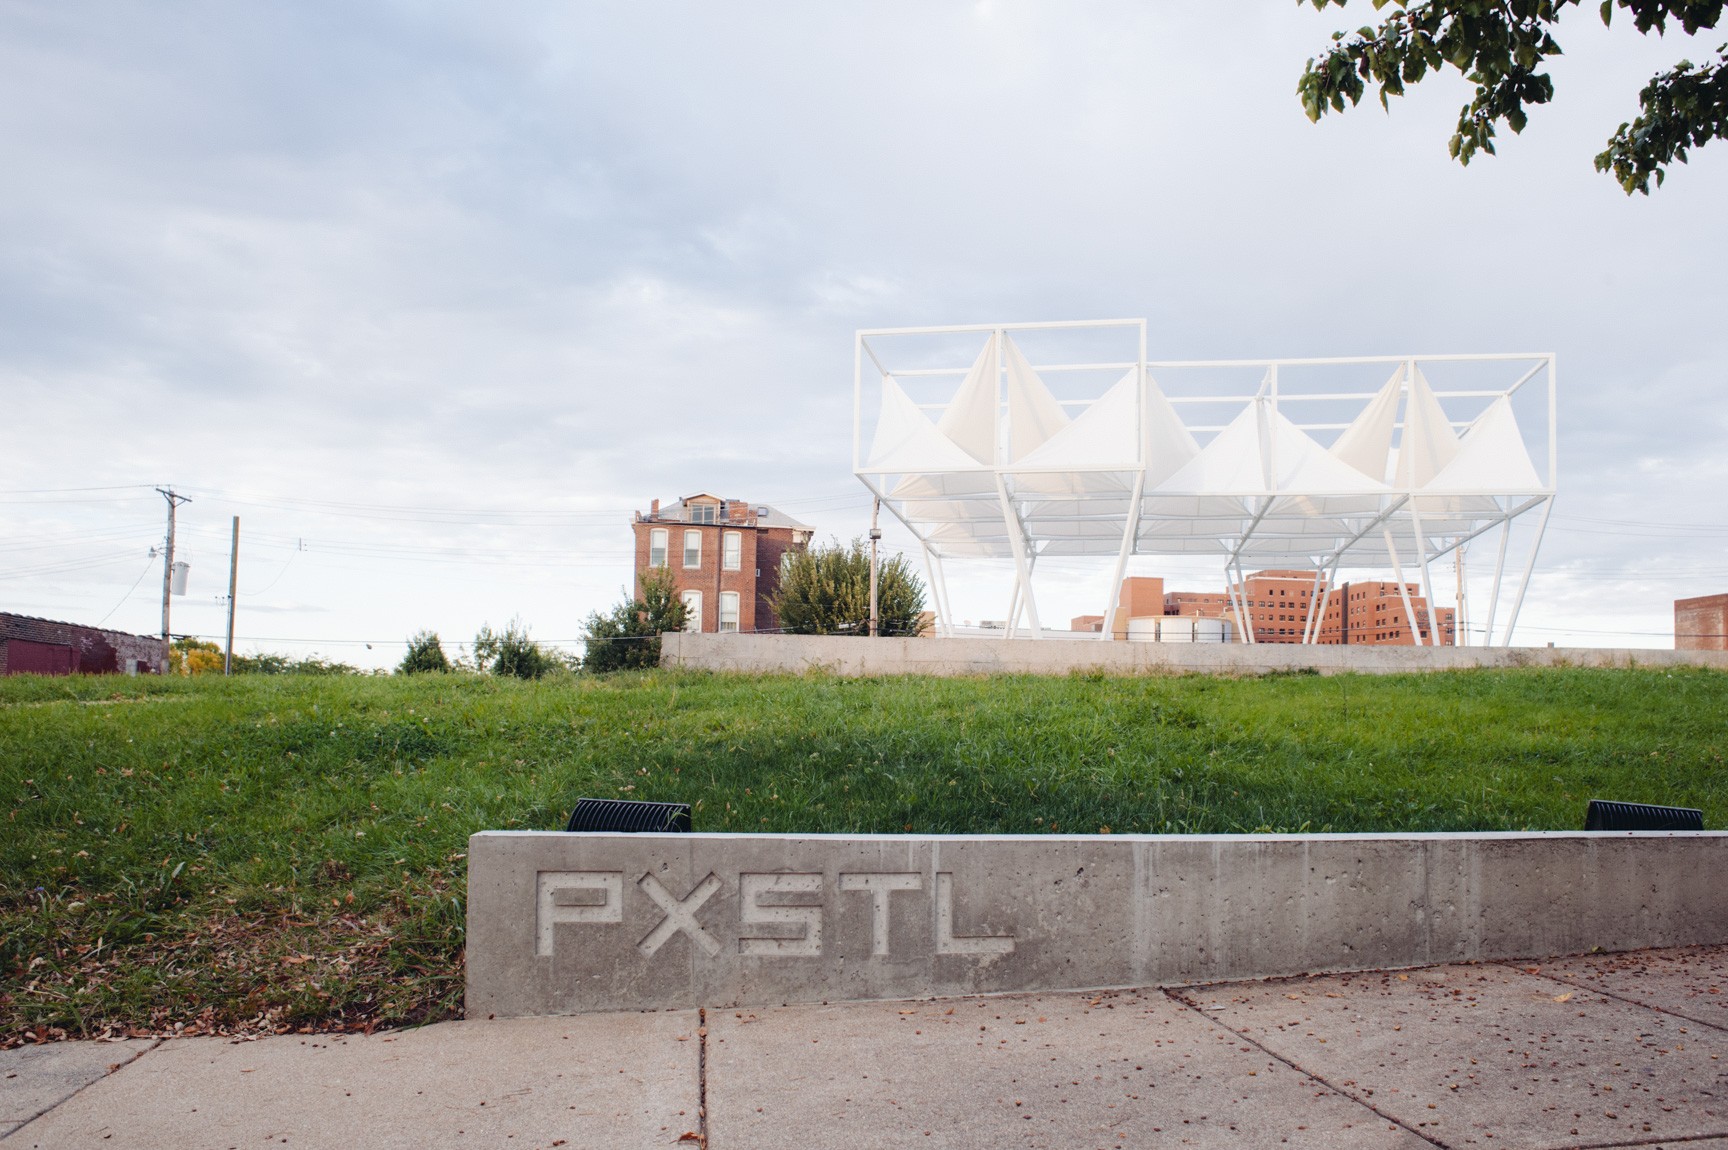 A clear view of the Lots installation, a geometric white sculpture with white triangular fabric pieces attached tautly to the structure's overhead beams. "PXSTL" is engraved into a concrete slab beside a sidewalk.